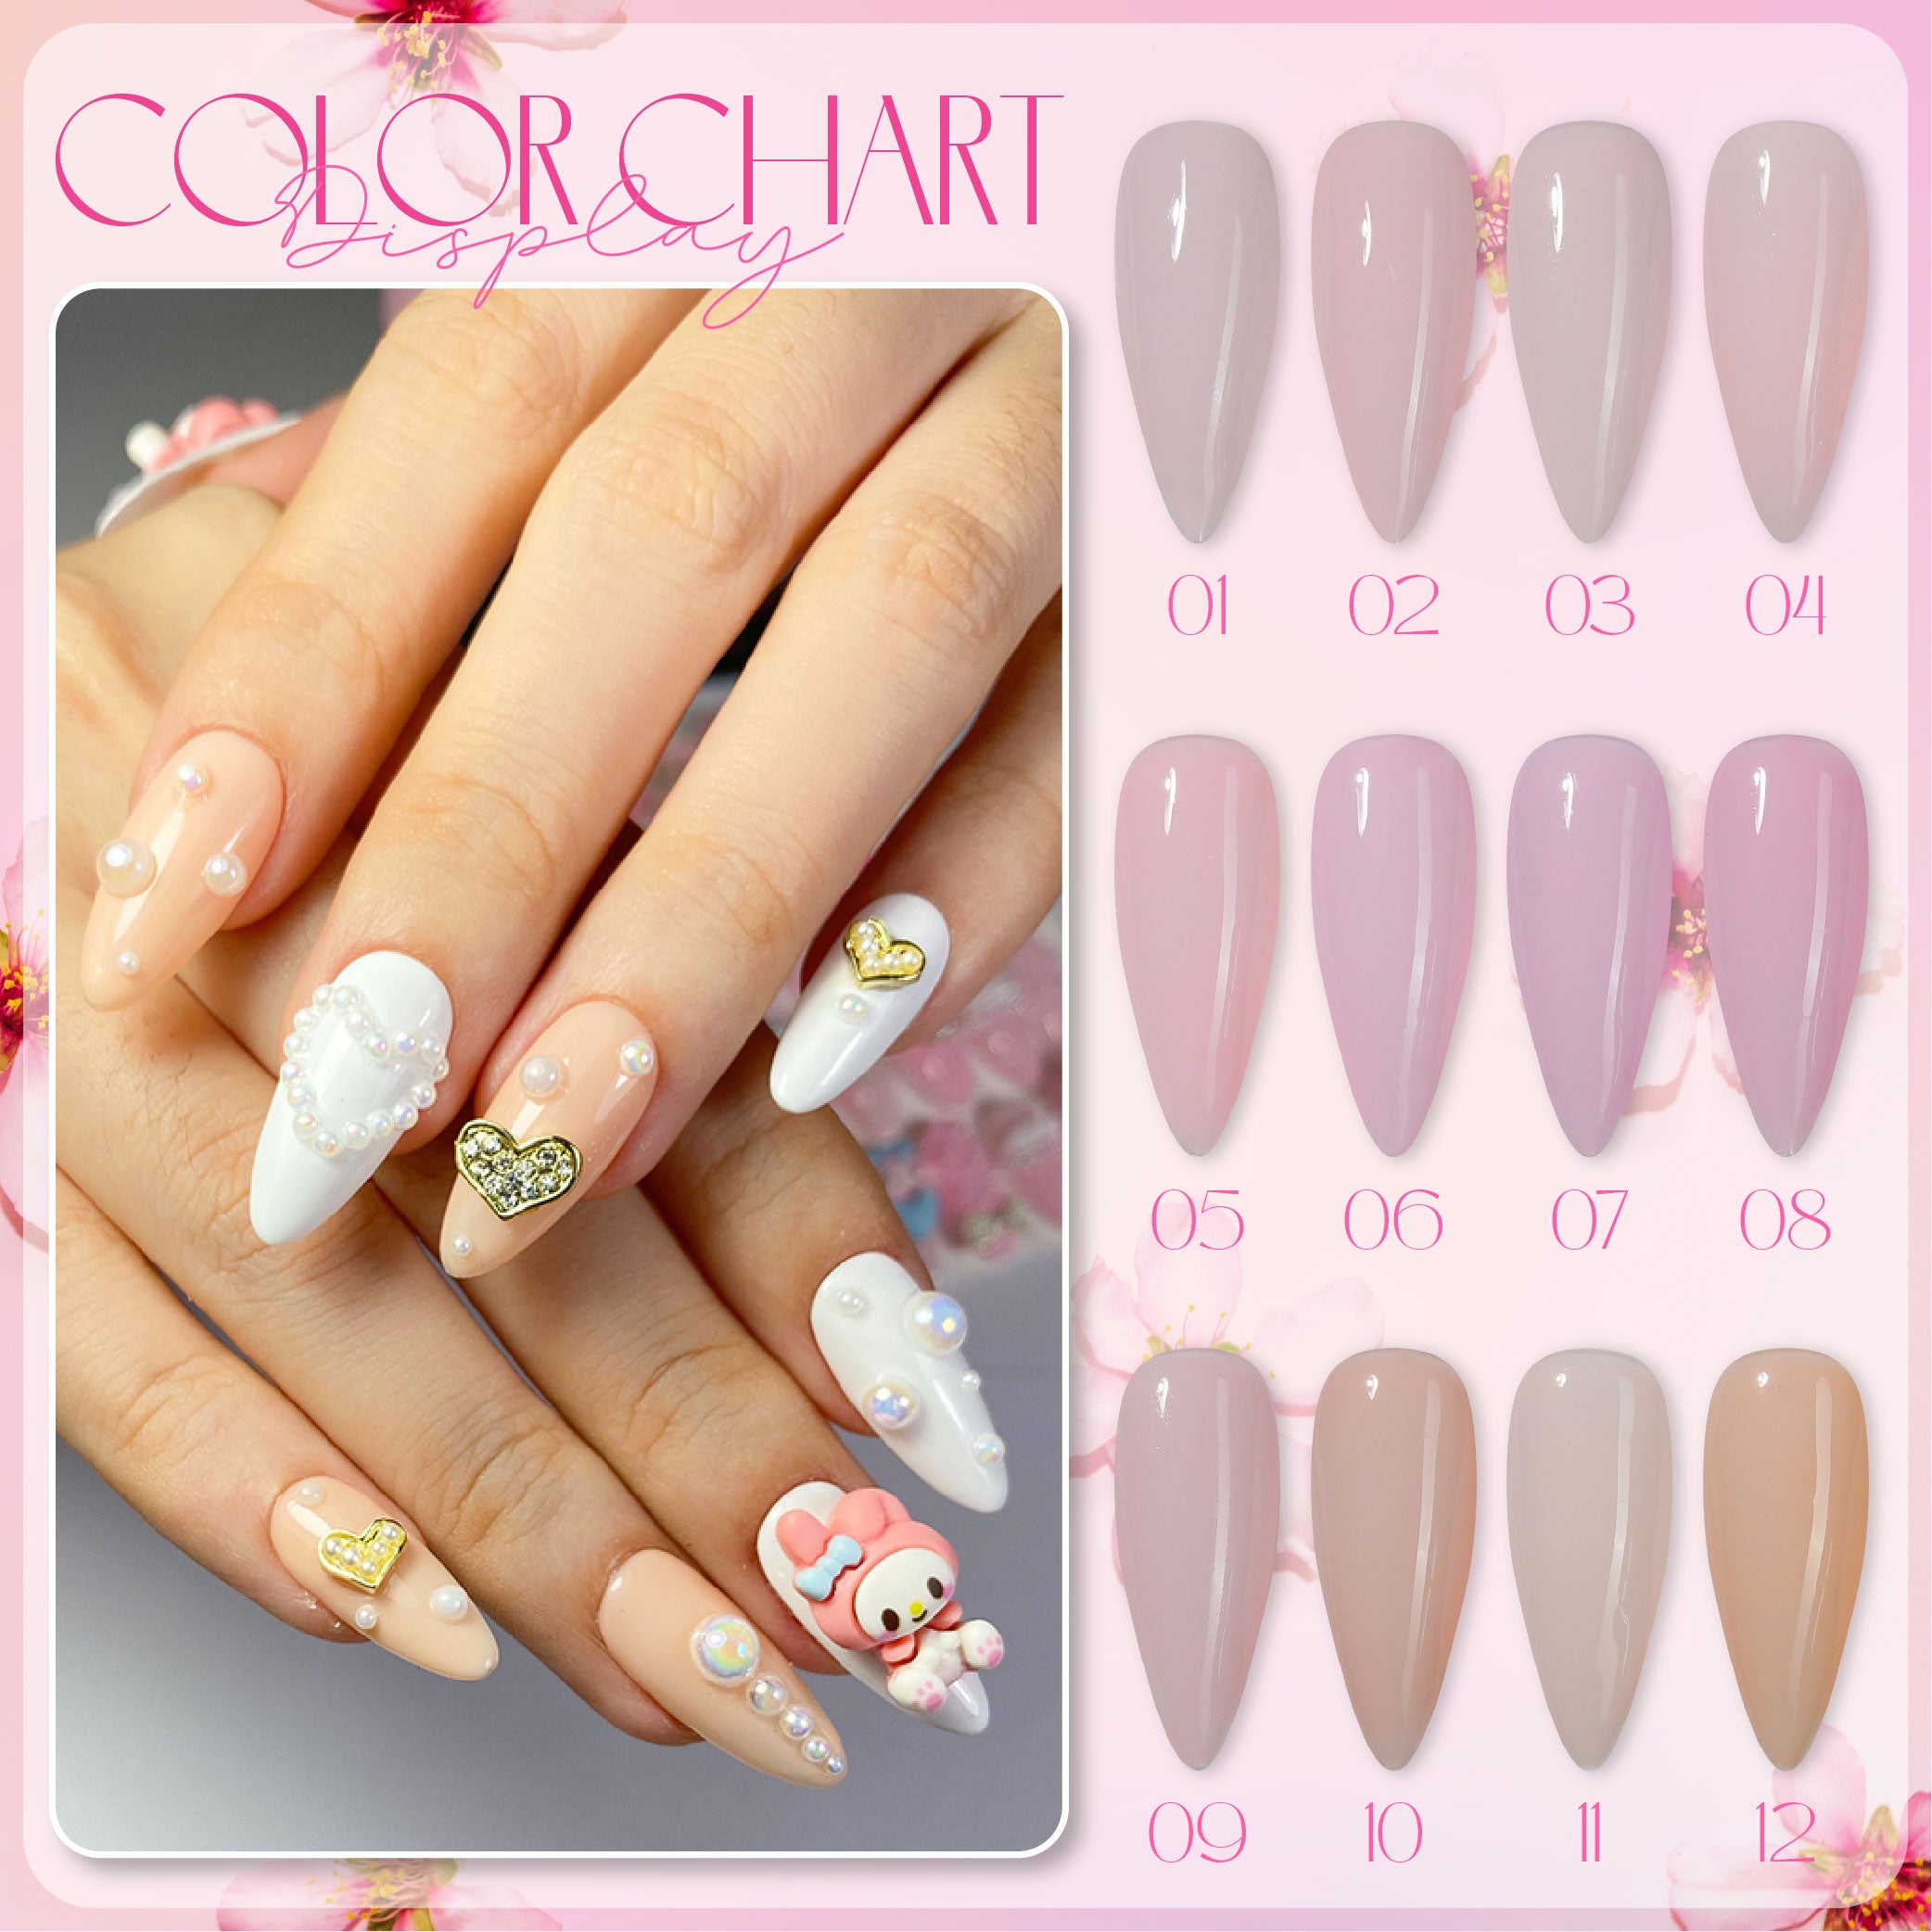 LDS BP Set 12 Colors - Blossom Pink Collection